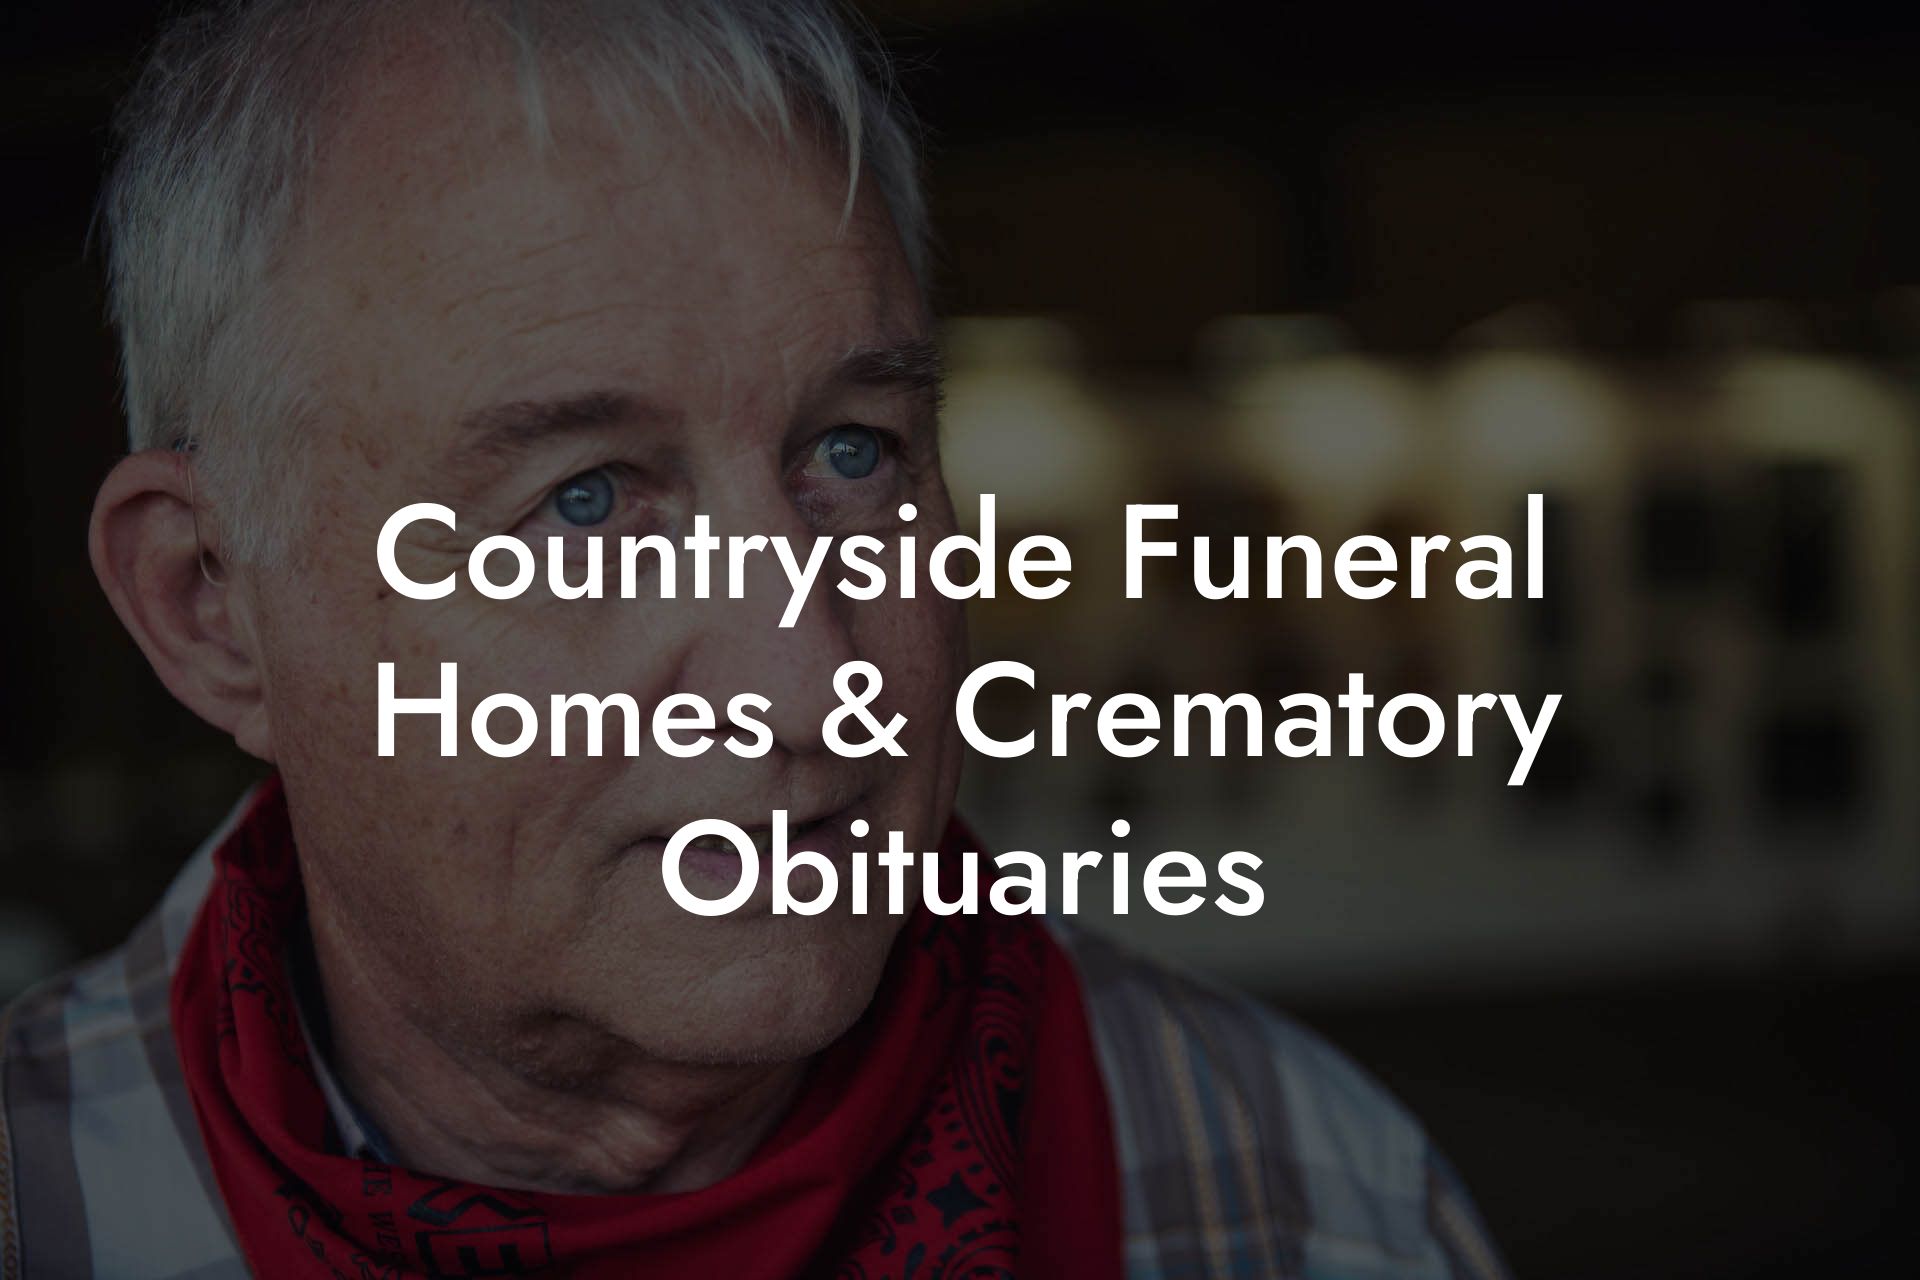 Countryside Funeral Homes & Crematory Obituaries